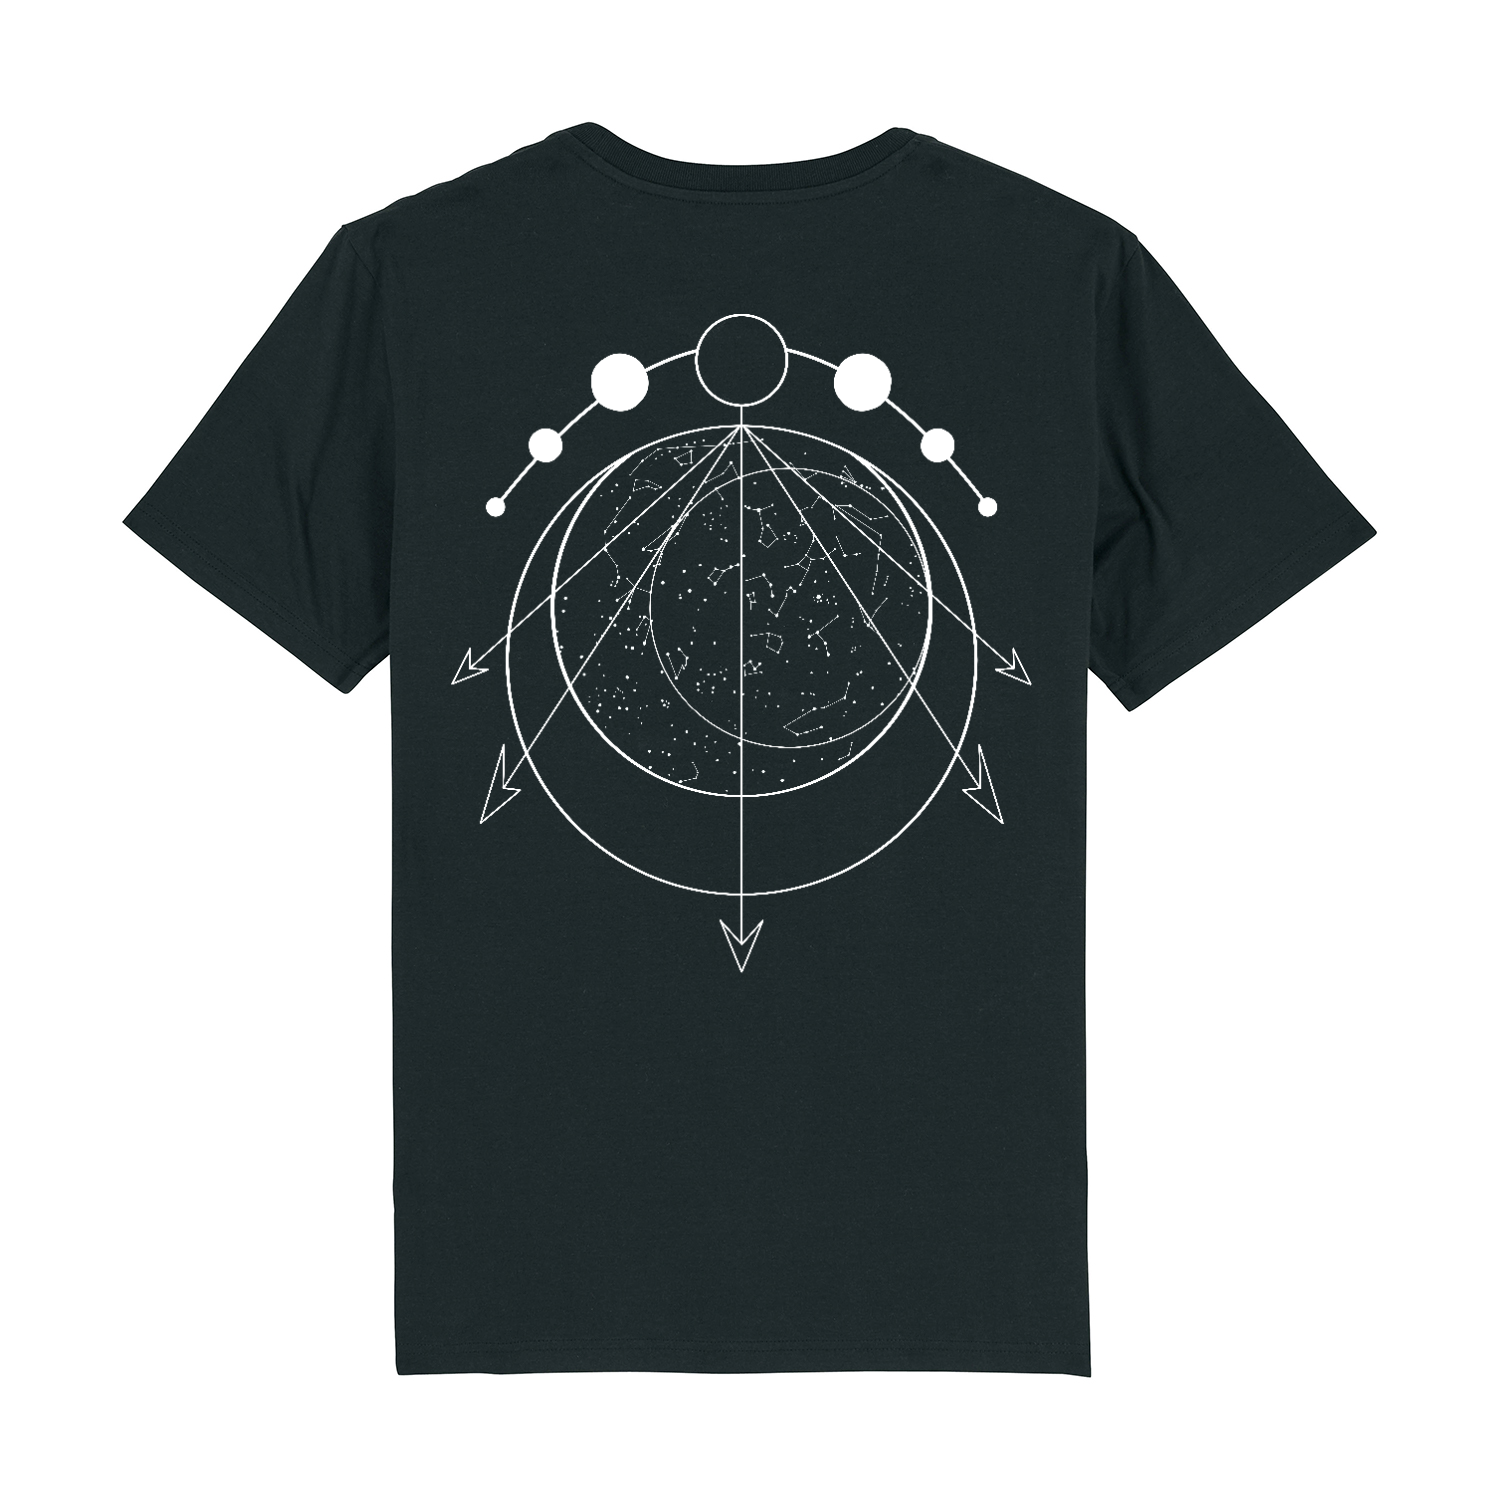 Reaching for the stars - Astronomical Design